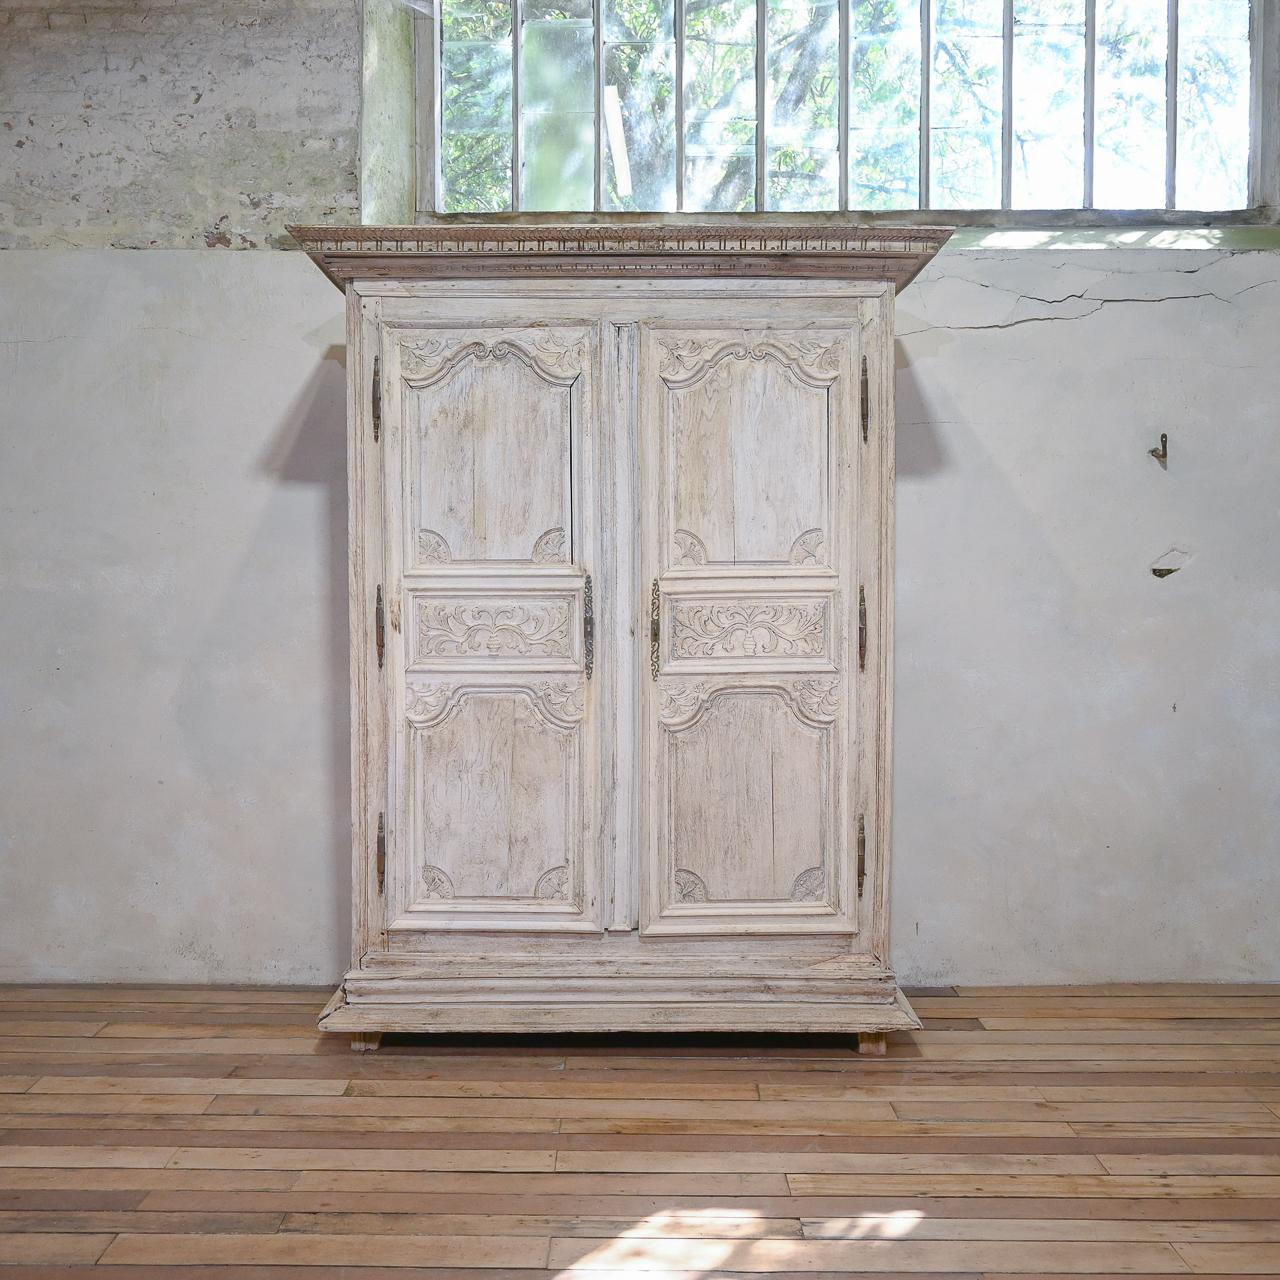 A large scale early 18th century Louis XIV bleached oak armoire. Of large proportions. Displaying a pair of elegantly carved doors - depicting acanthus leaves, flowers and swags. The sides consist of three panels: a horizontal rectangle in between